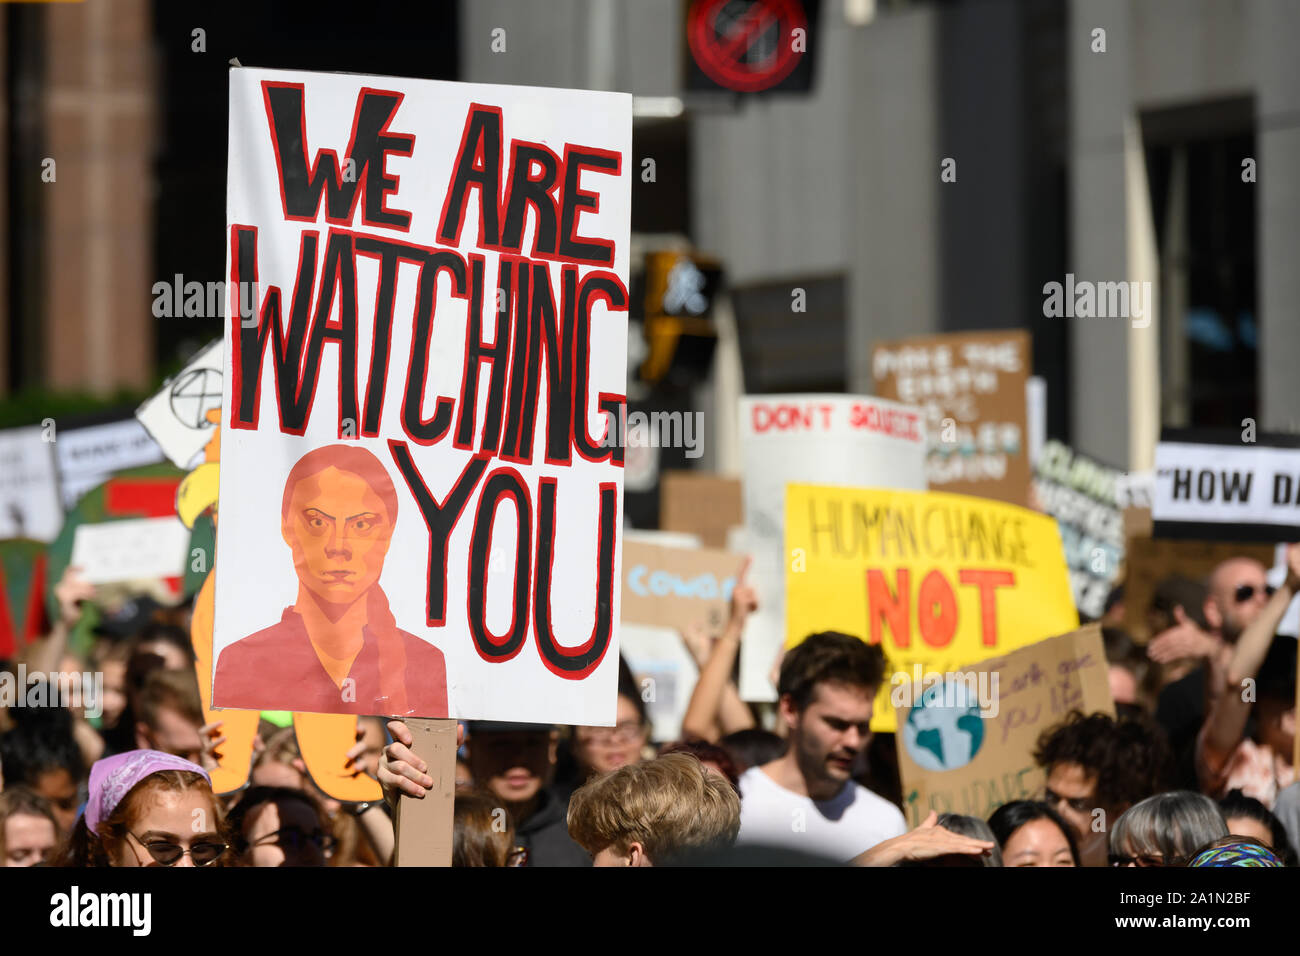 A demonstrator marches with a sign featuring Greta Thunberg during the Global Climate Strike in Toronto, Ontario on September 27, 2019. Stock Photo